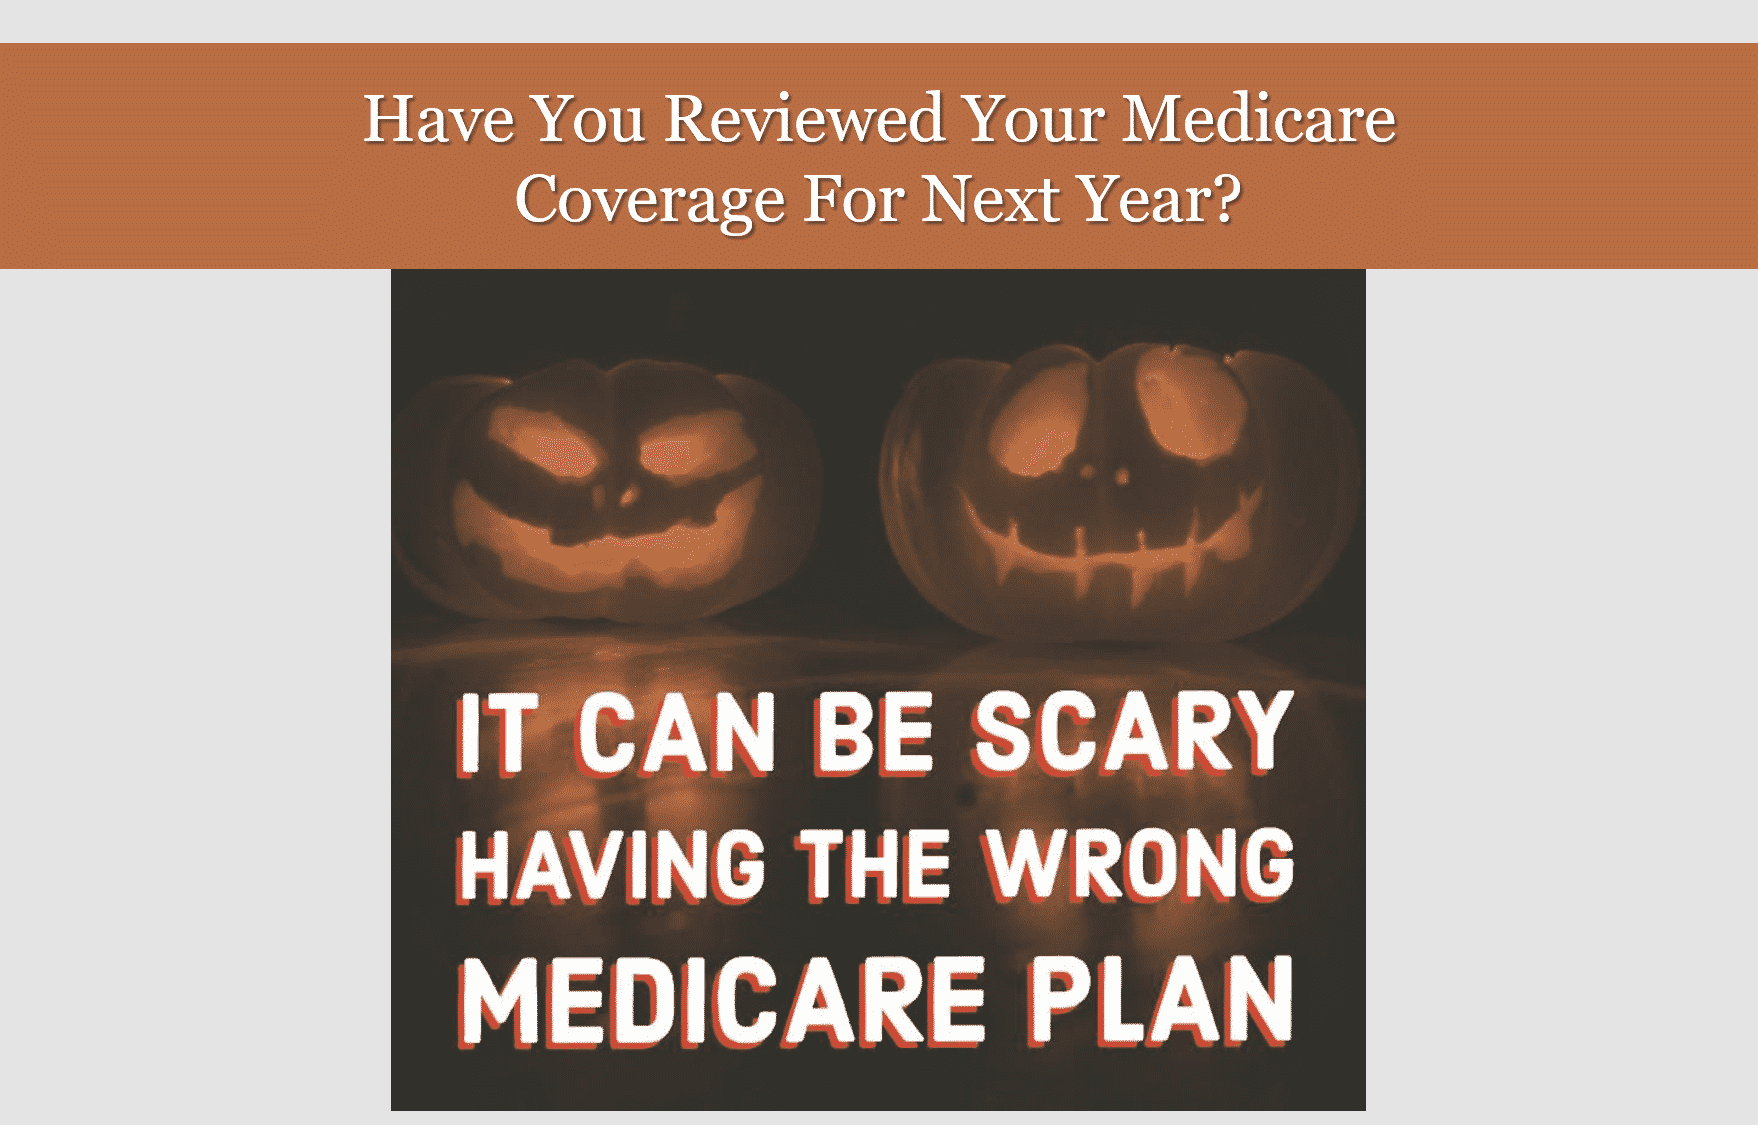 Have You Reviewed Your Medicare Coverage For Next Year?